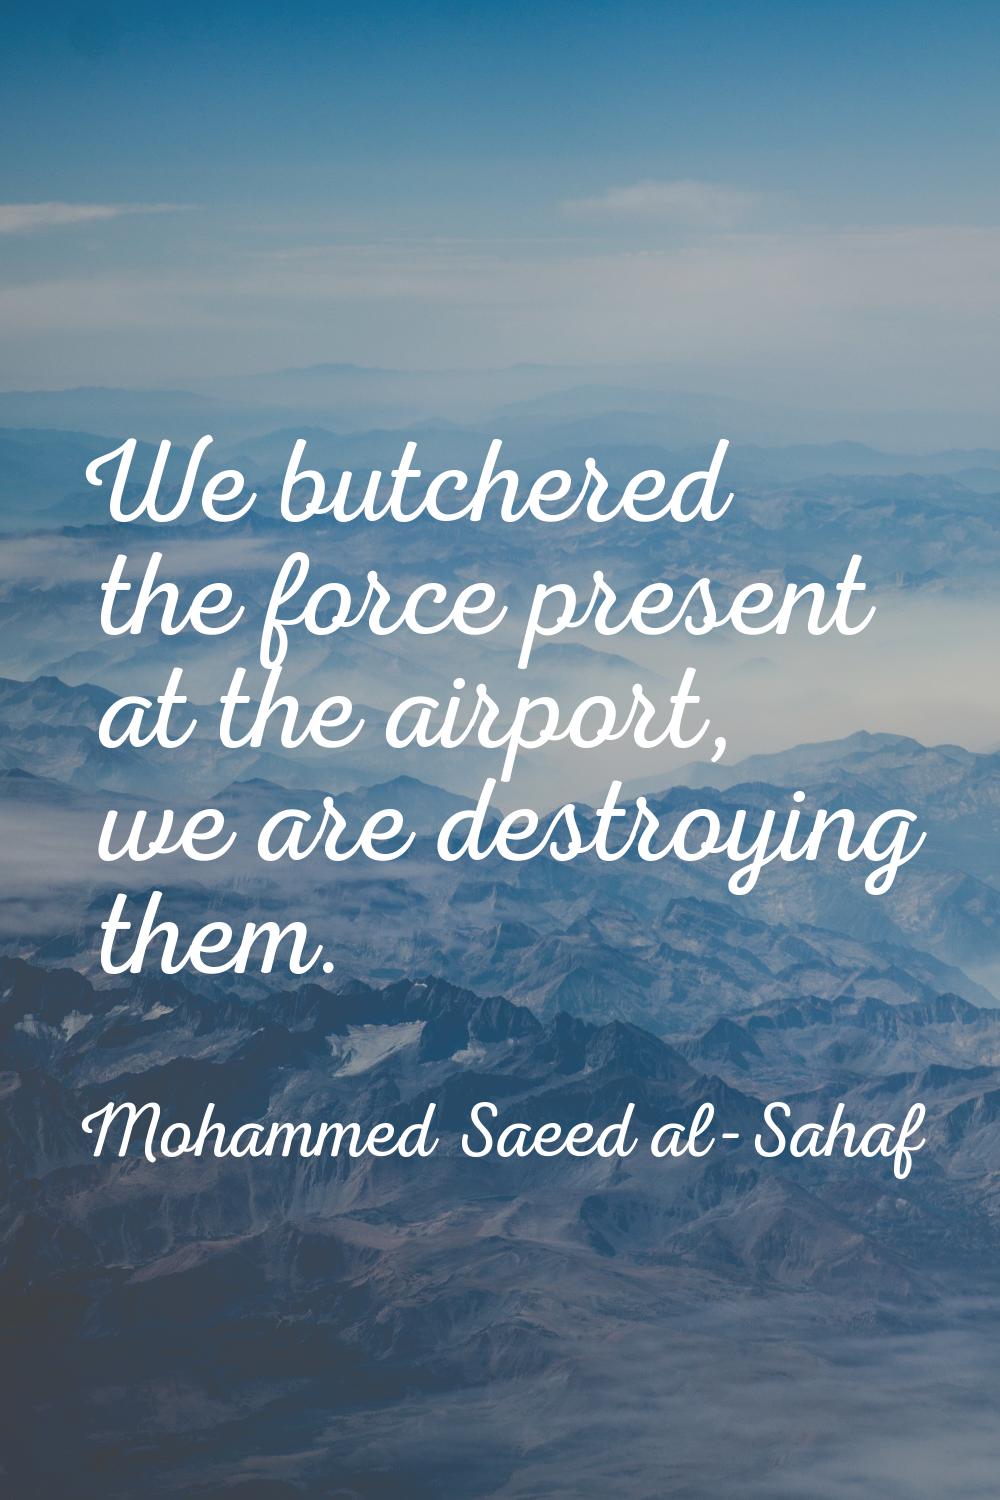 We butchered the force present at the airport, we are destroying them.